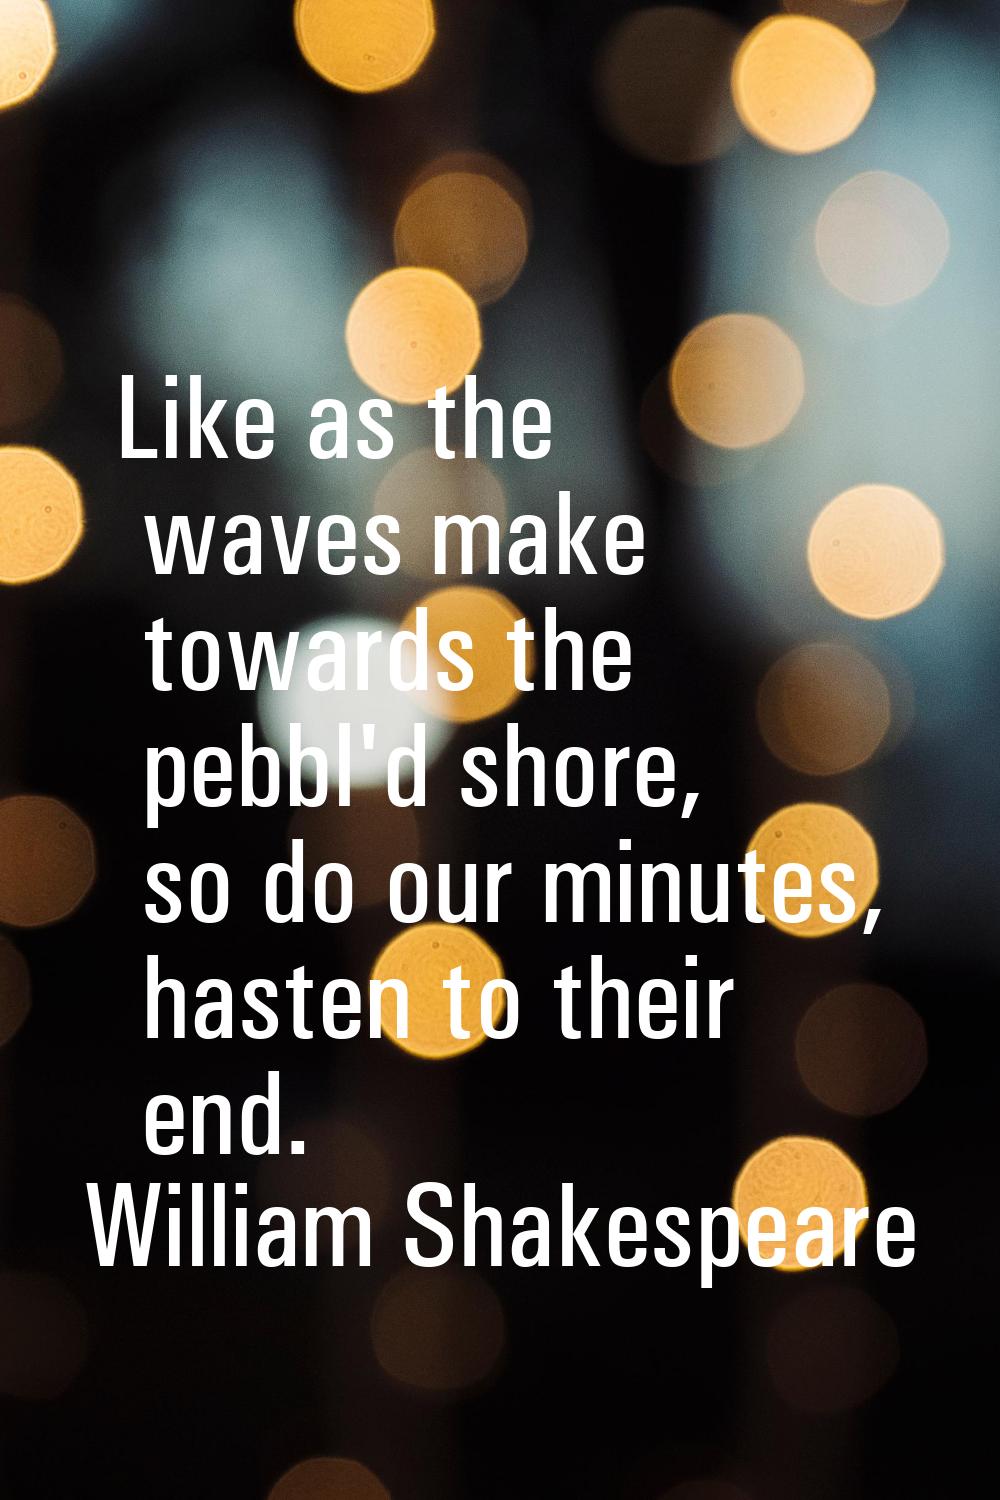 Like as the waves make towards the pebbl'd shore, so do our minutes, hasten to their end.